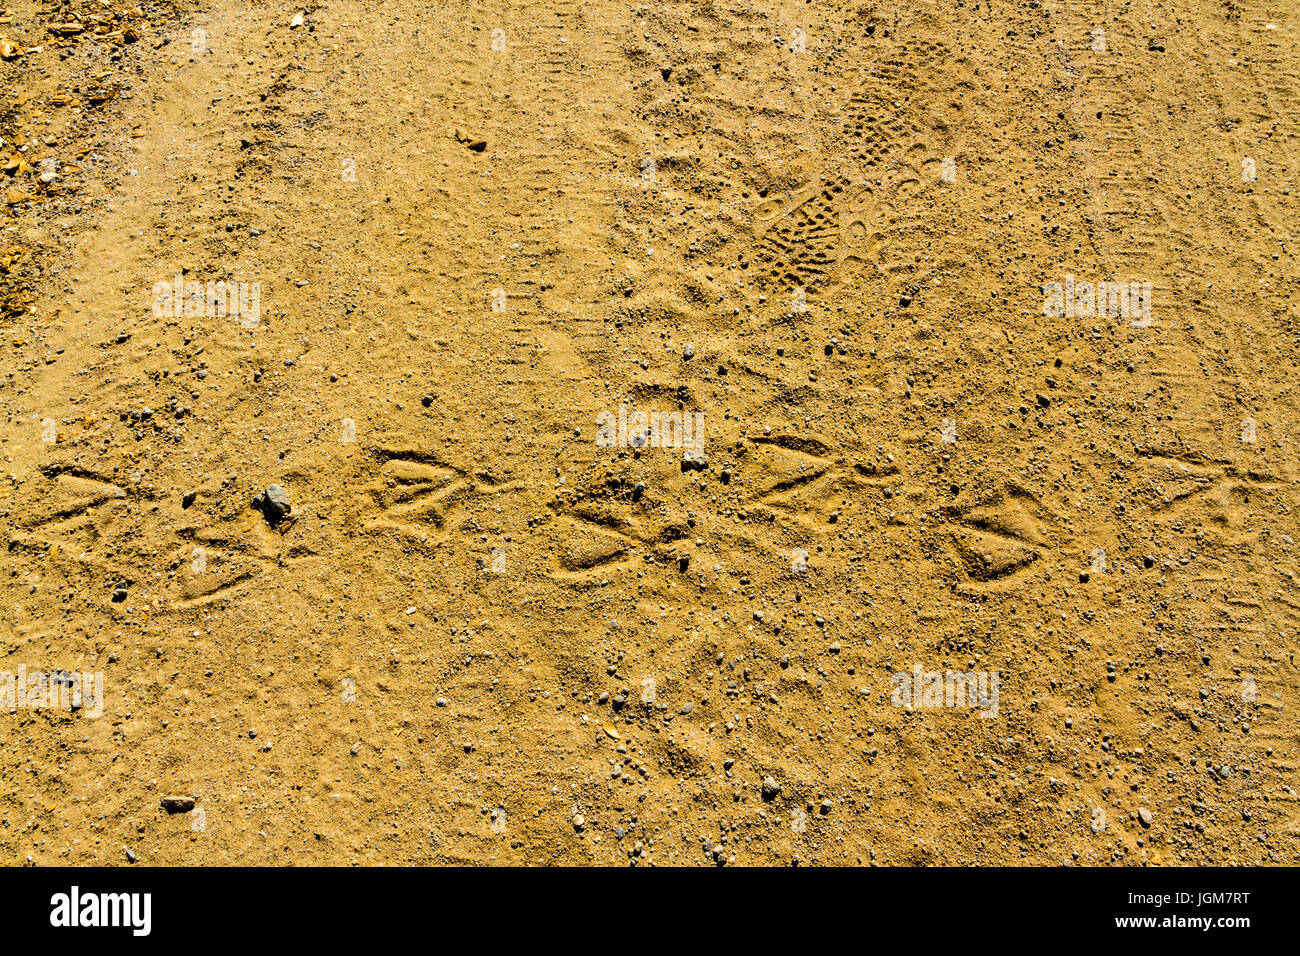 Duck prints, footprints, and tire tracks on an irrigation ditch road the the California Central Valley, Stock Photo